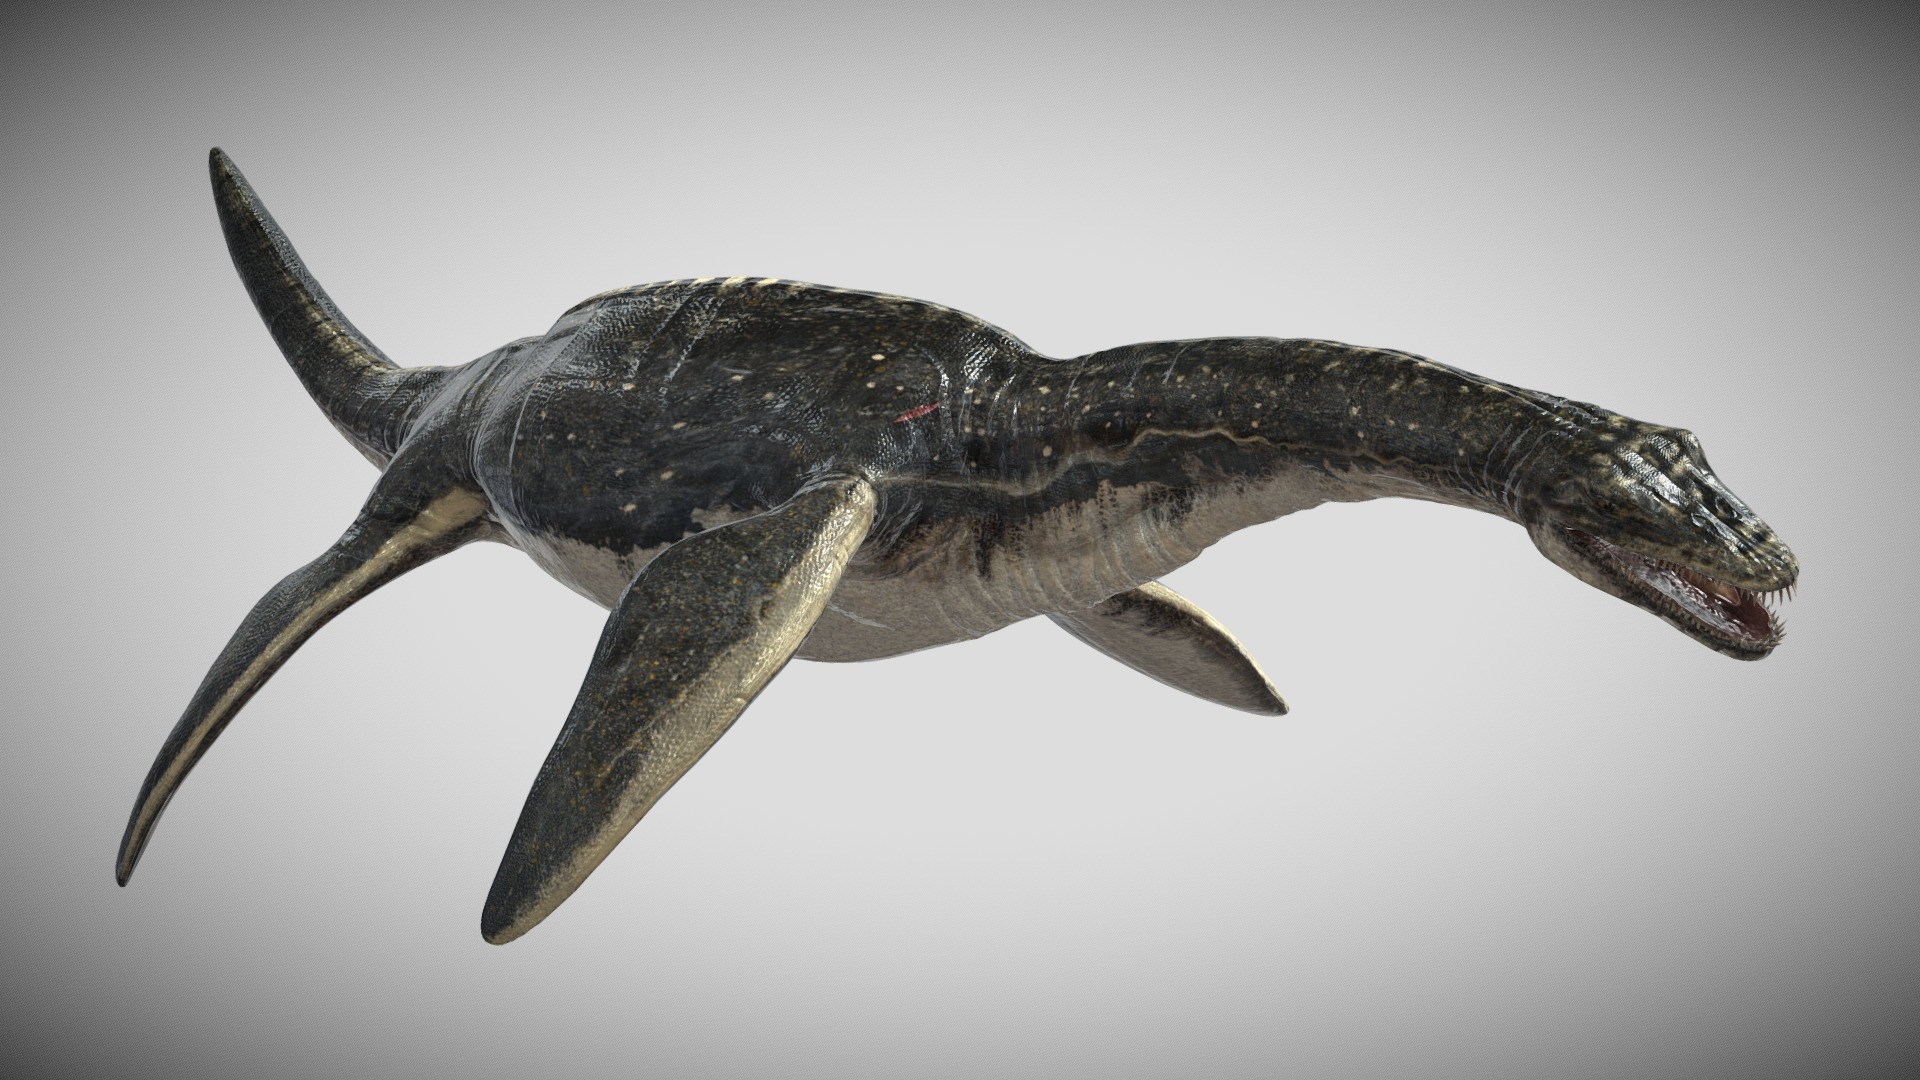 3D model Plesiosaurus 3D Rigged model - This is a 3D model of the Plesiosaurus 3D Rigged model. The 3D model is about a black and white fish.